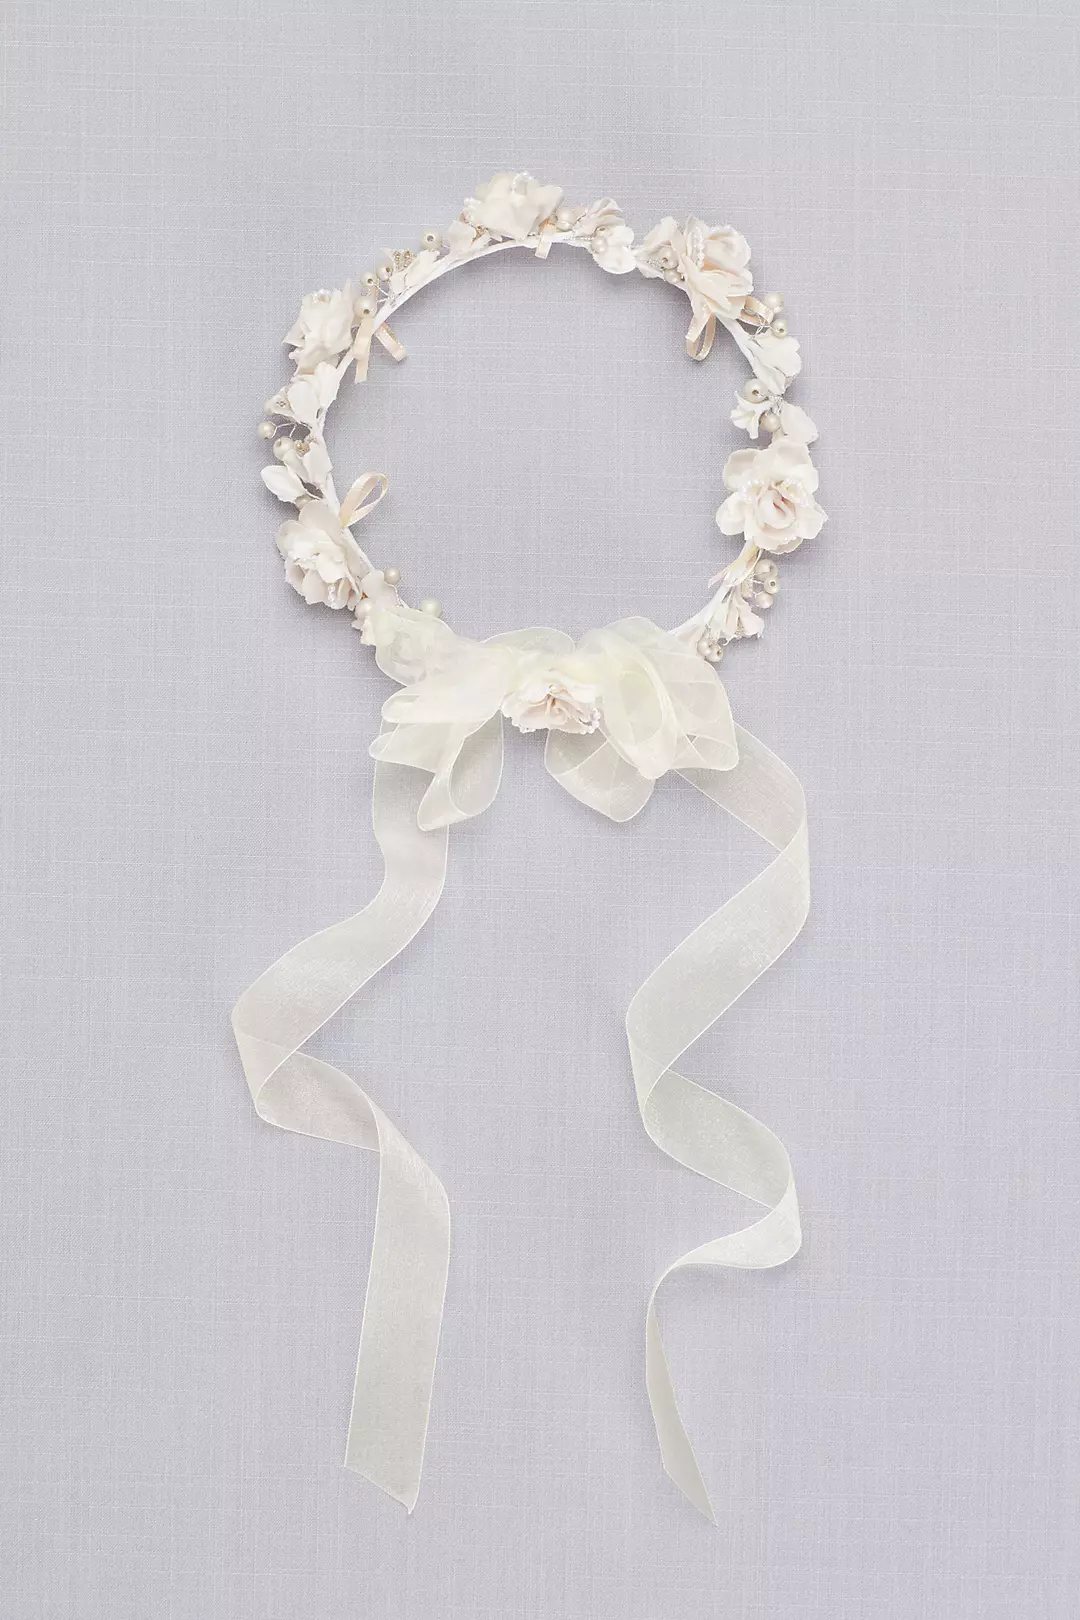 Champagne Pearl Flower Girl Crown Image